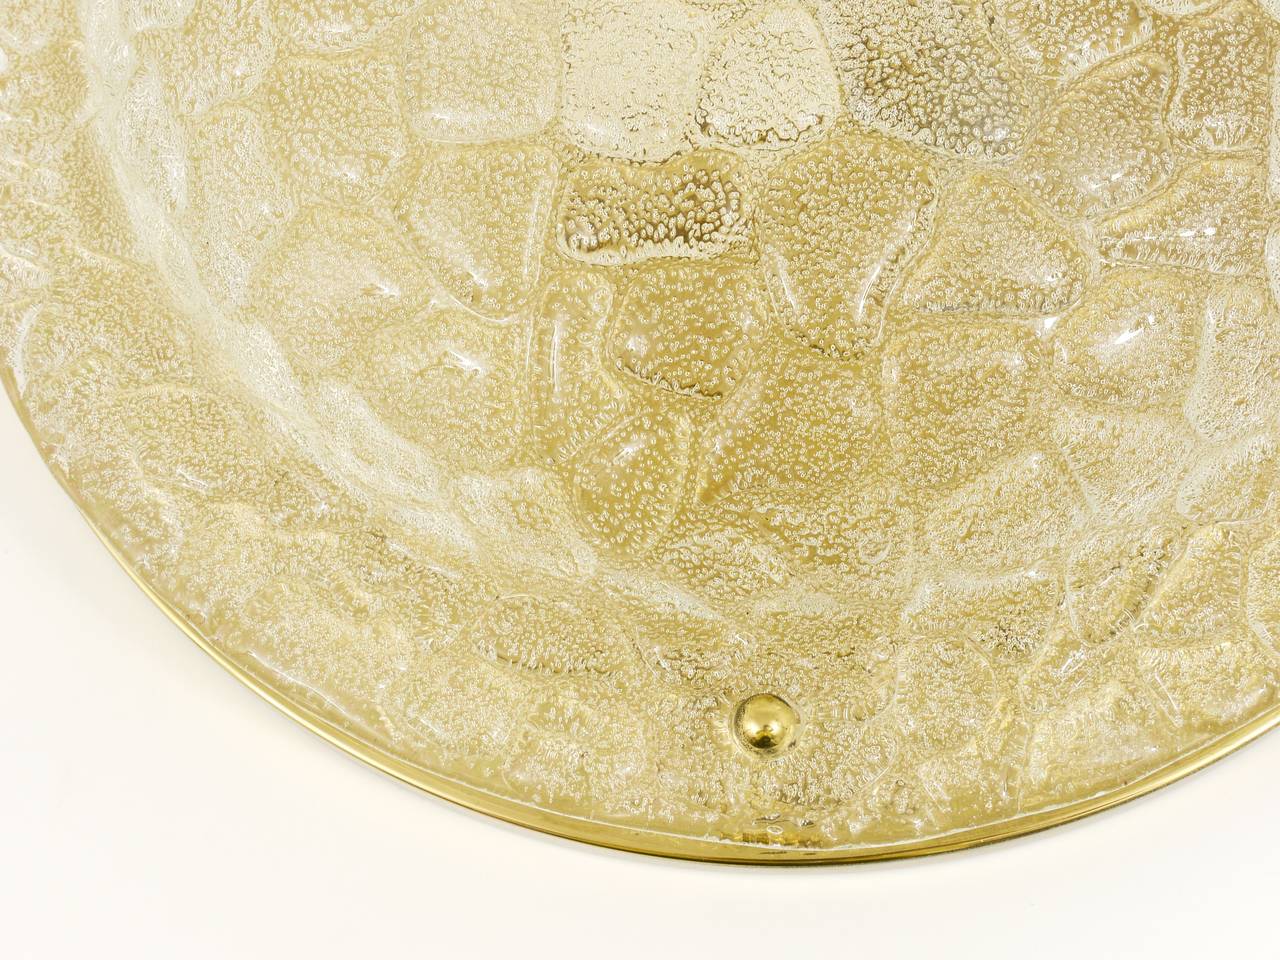 Large Hillebrand Textured Bubble Glass and Brass Flush Mount, Germany, 1970s For Sale 4